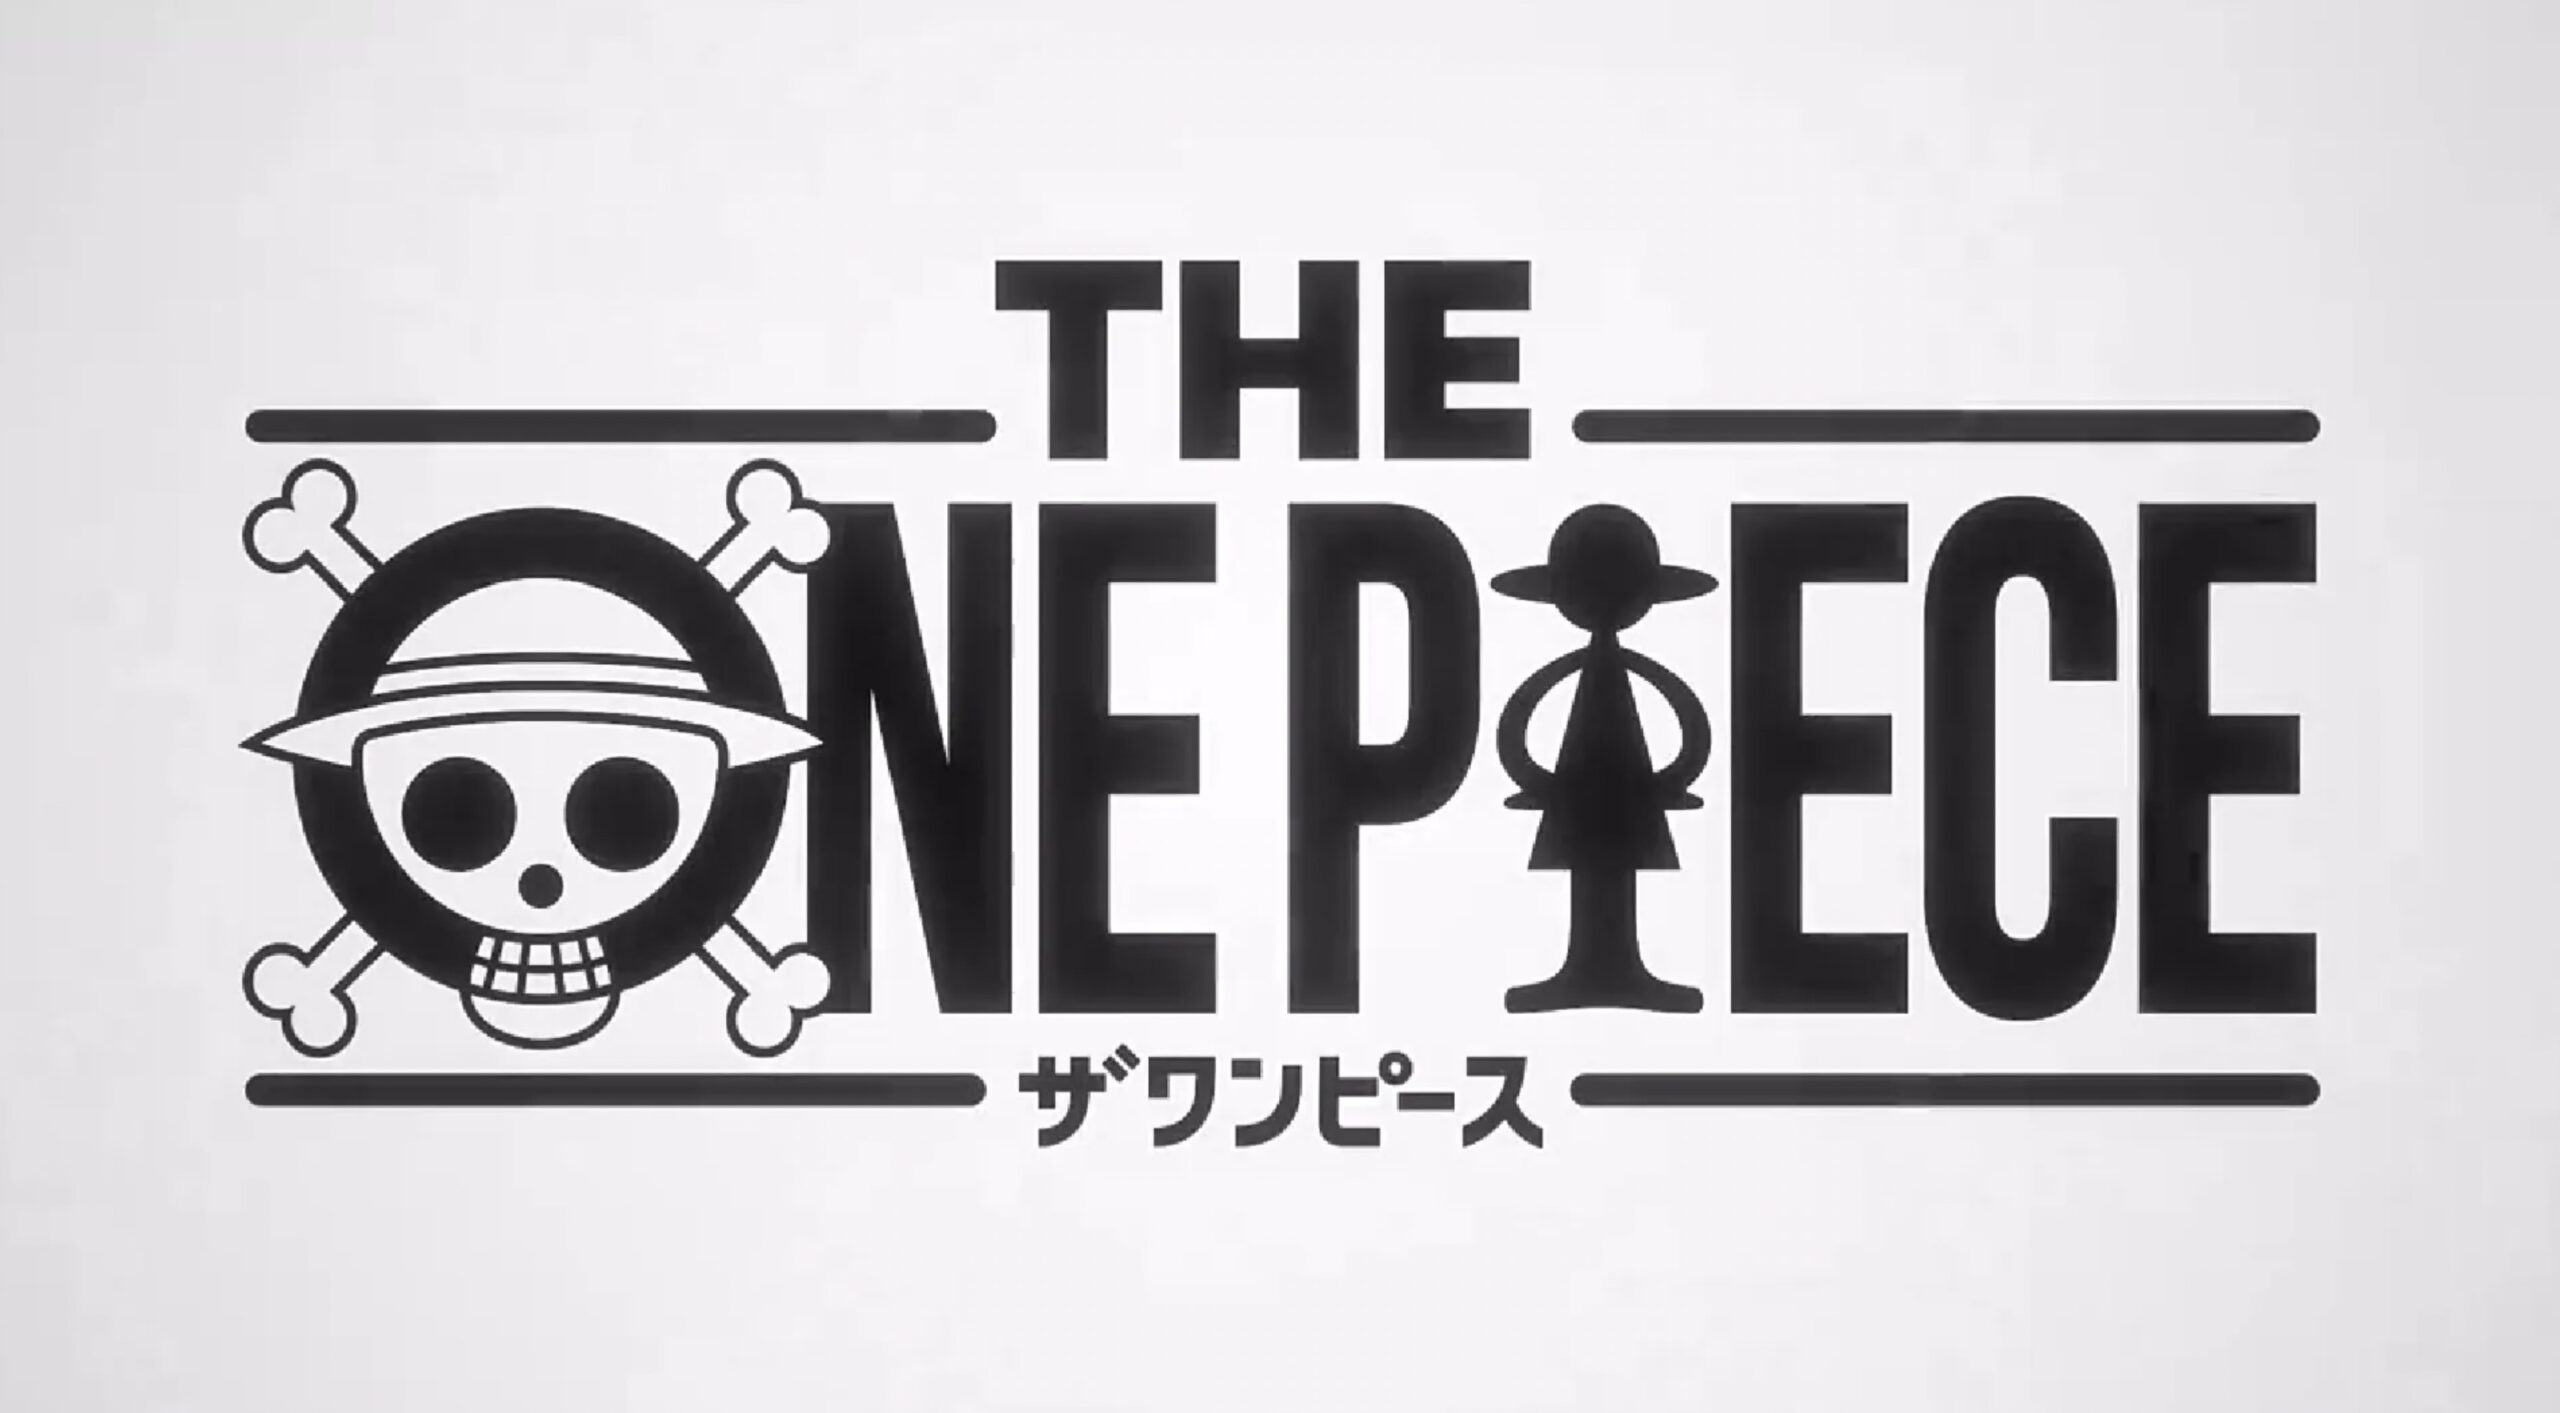 Wit Studio Ensured That The New One Piece Remake Will Be Better Than The Original